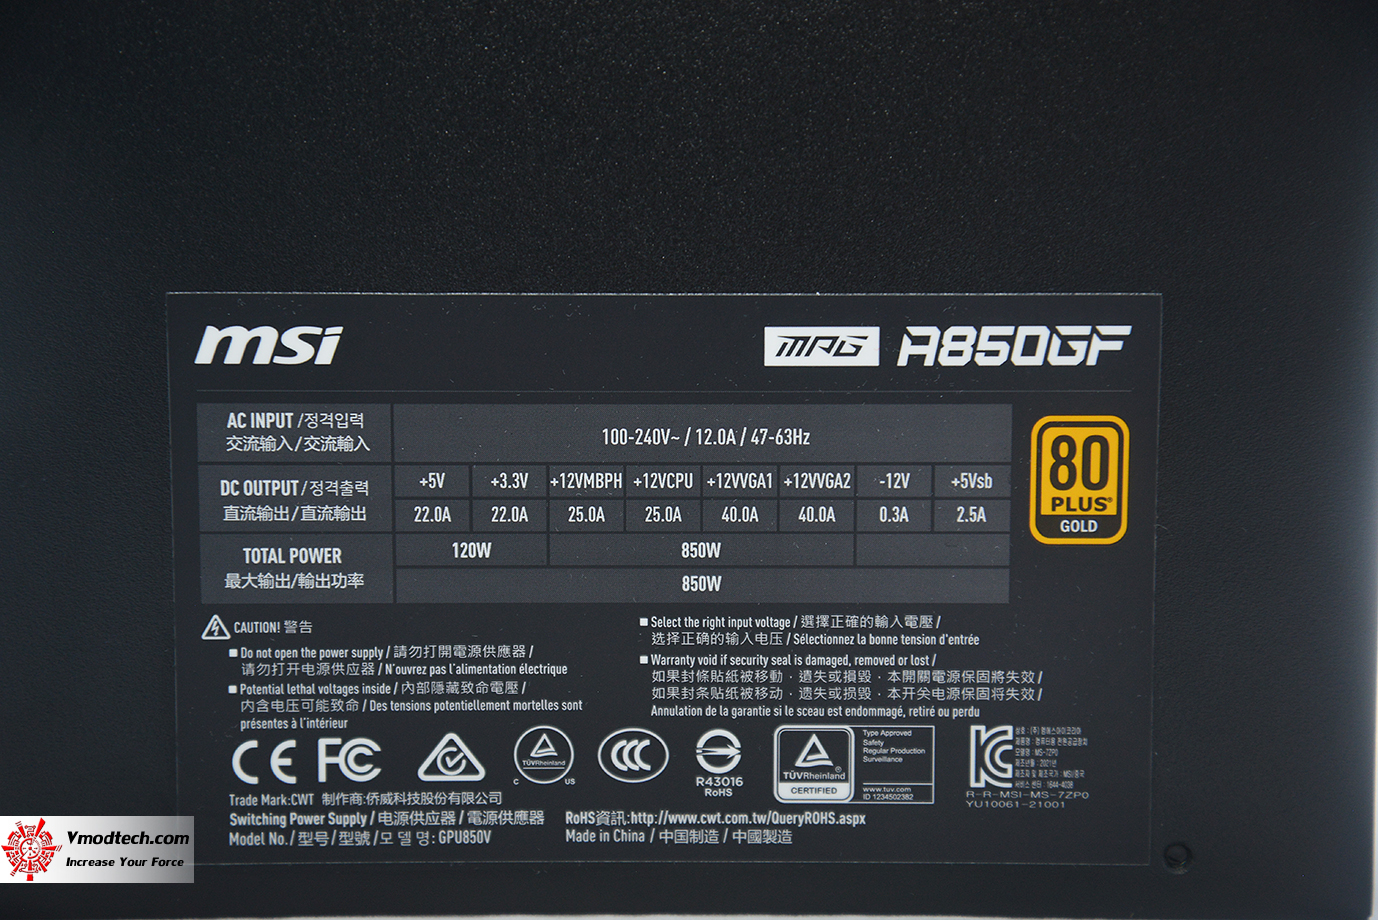 dsc 7445 MSI MPG A850GF 80 PLUS GOLD POWER SUPPLY REVIEW